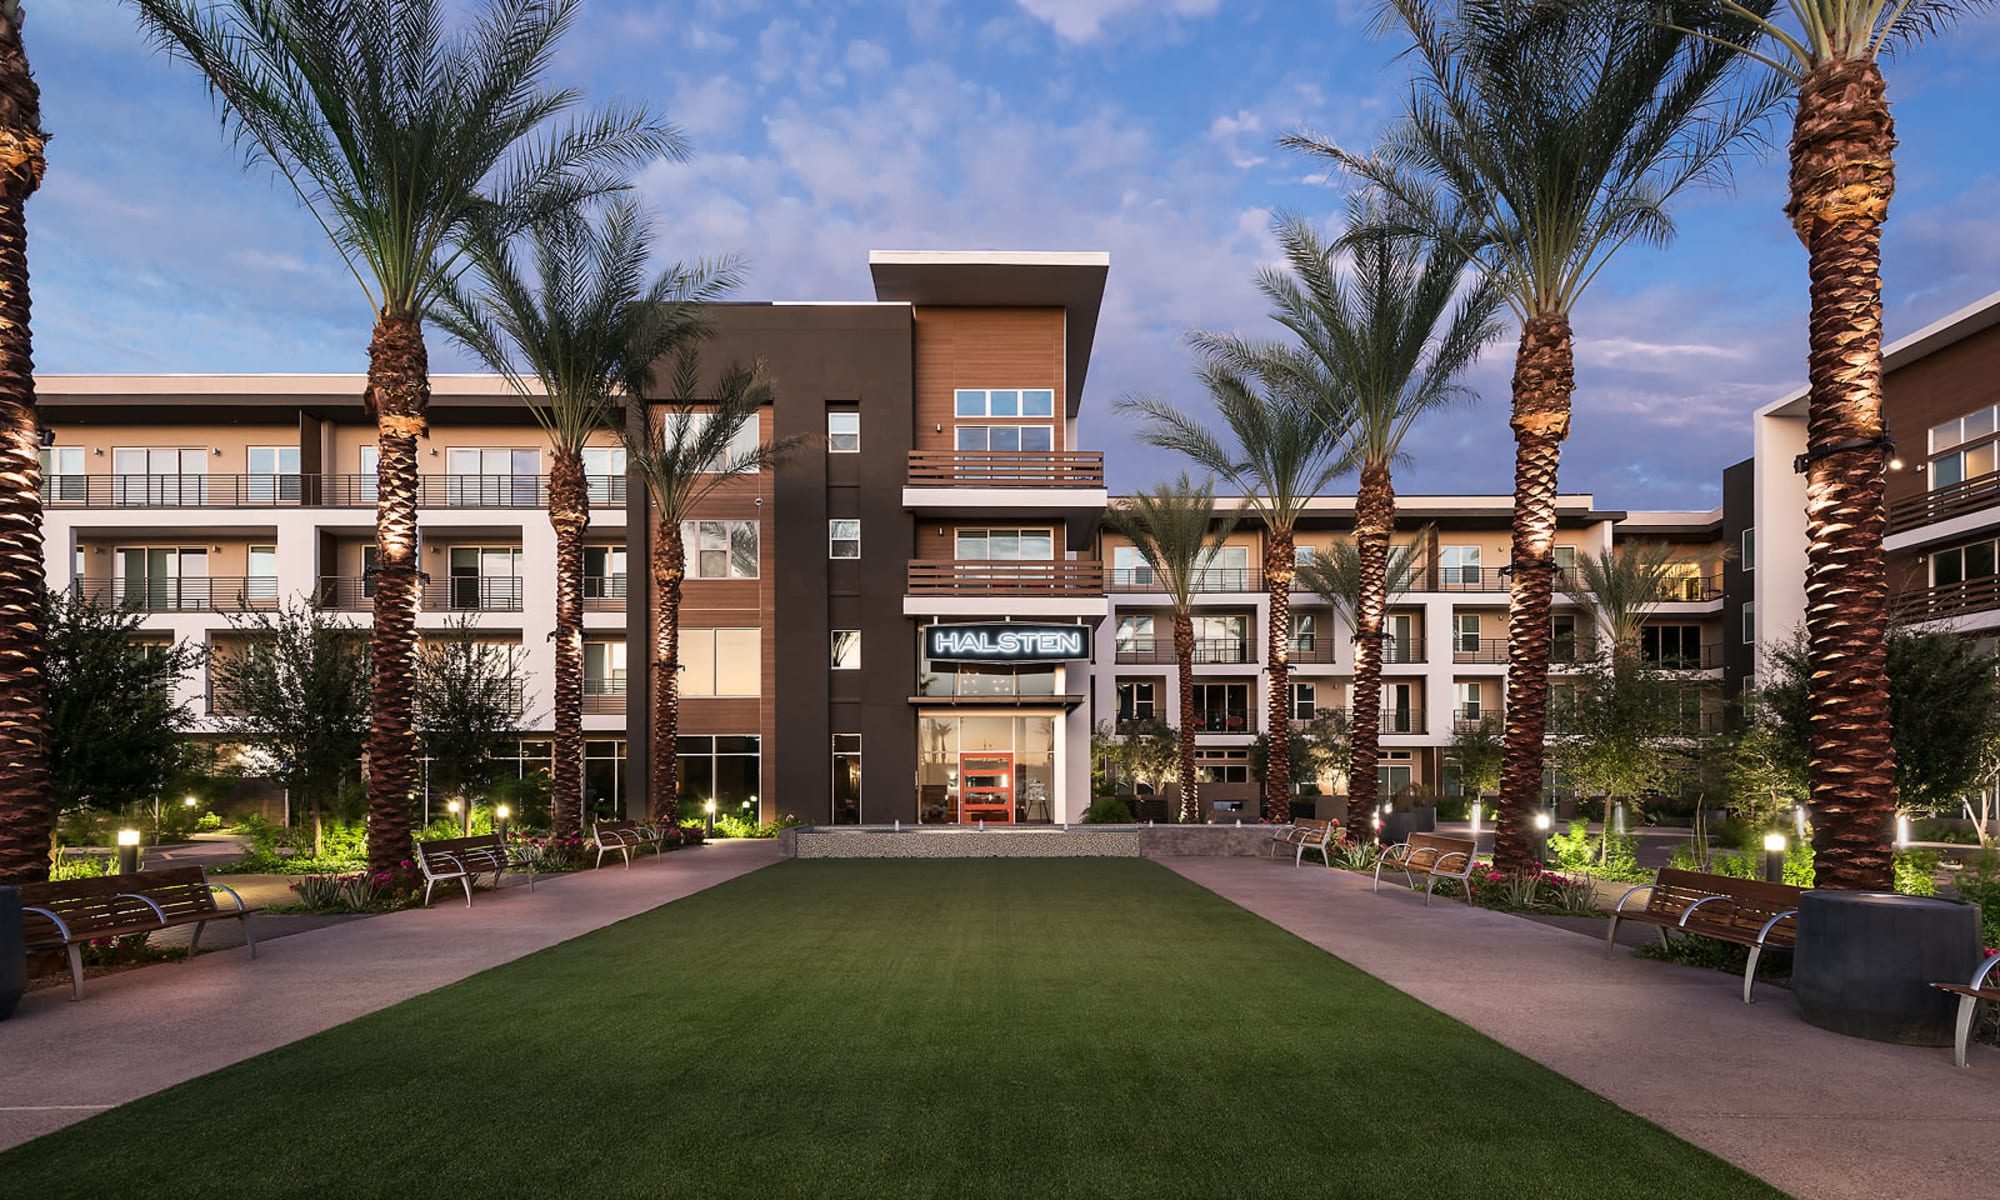 New Chauncey Apartments Scottsdale for Simple Design